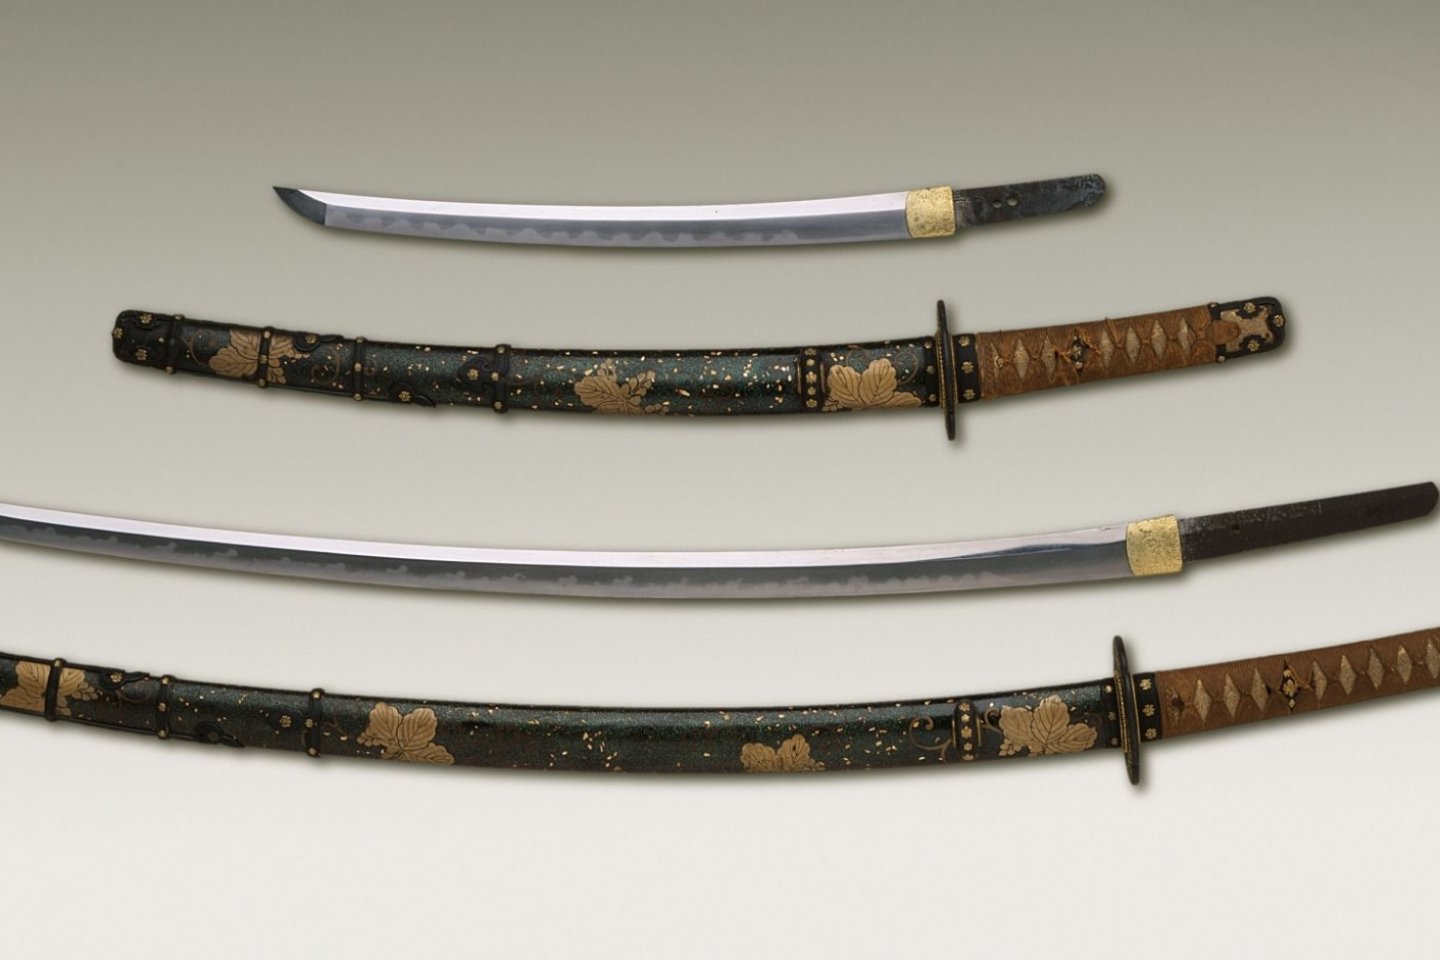 Traditional Japanese swords